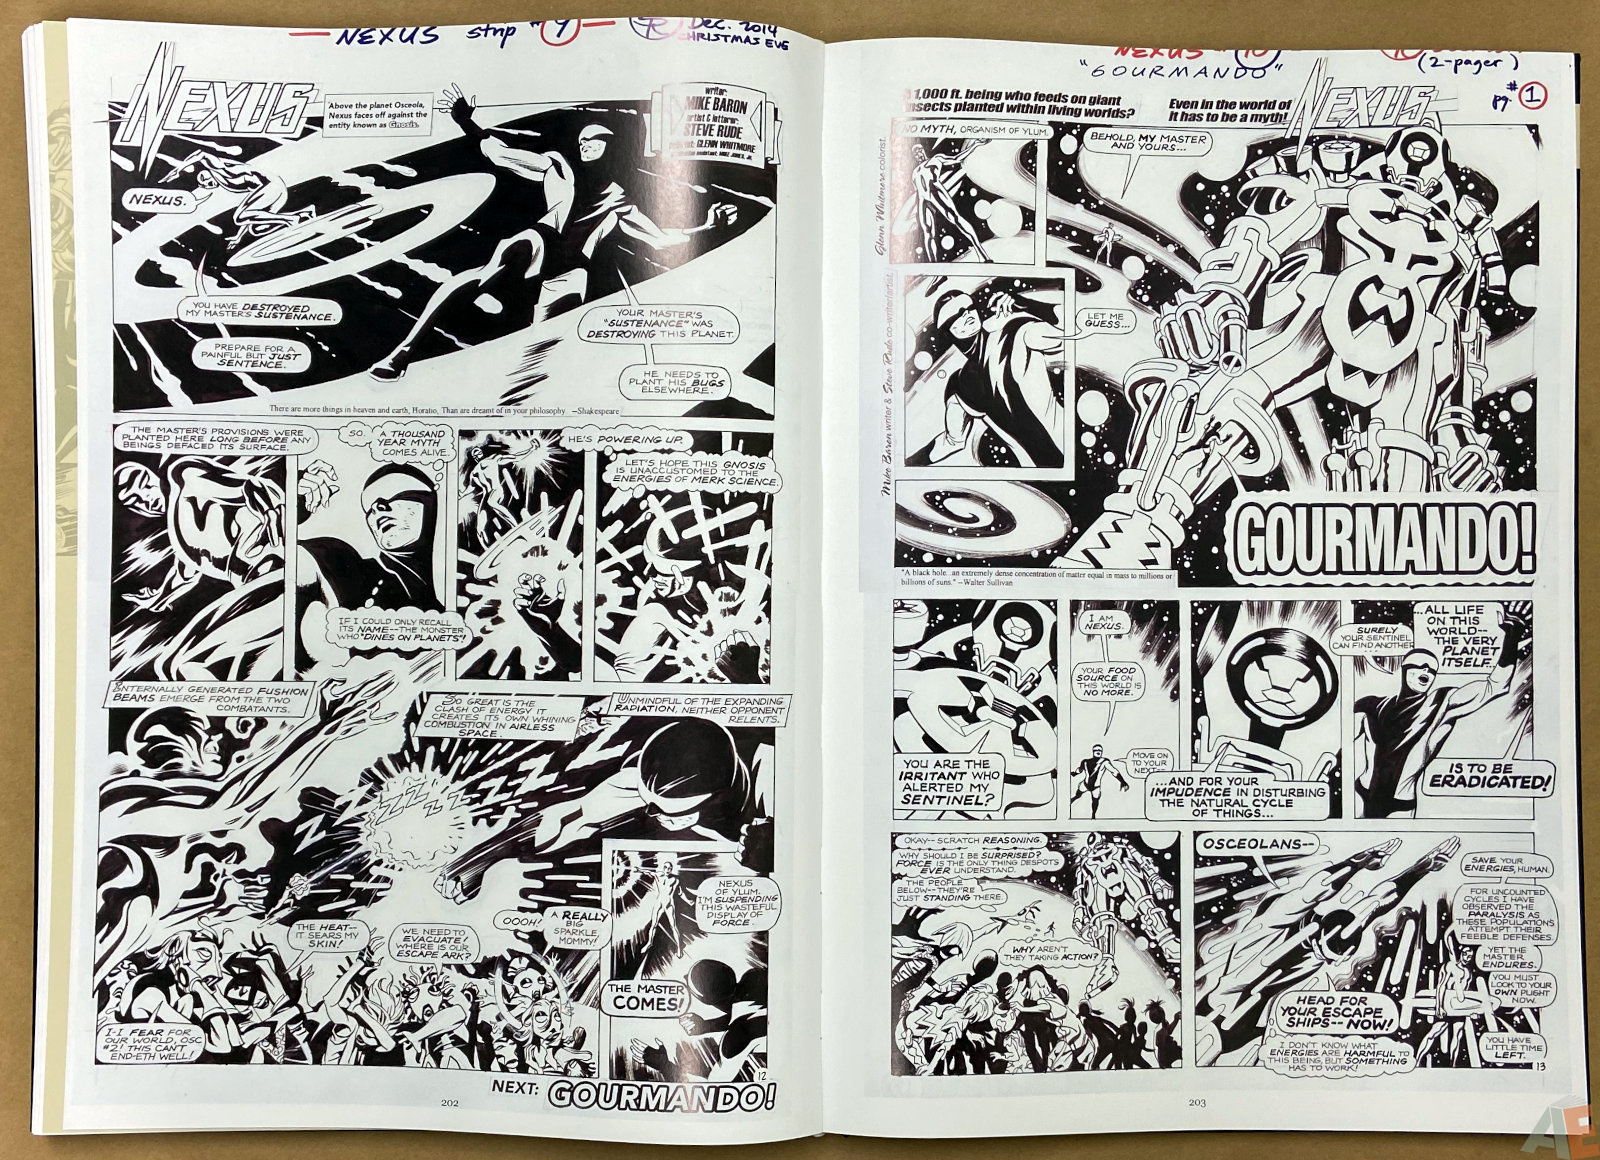 Nexus The Newspaper Strips Volume One The Coming of Gourmando Deluxe Edition interior 10